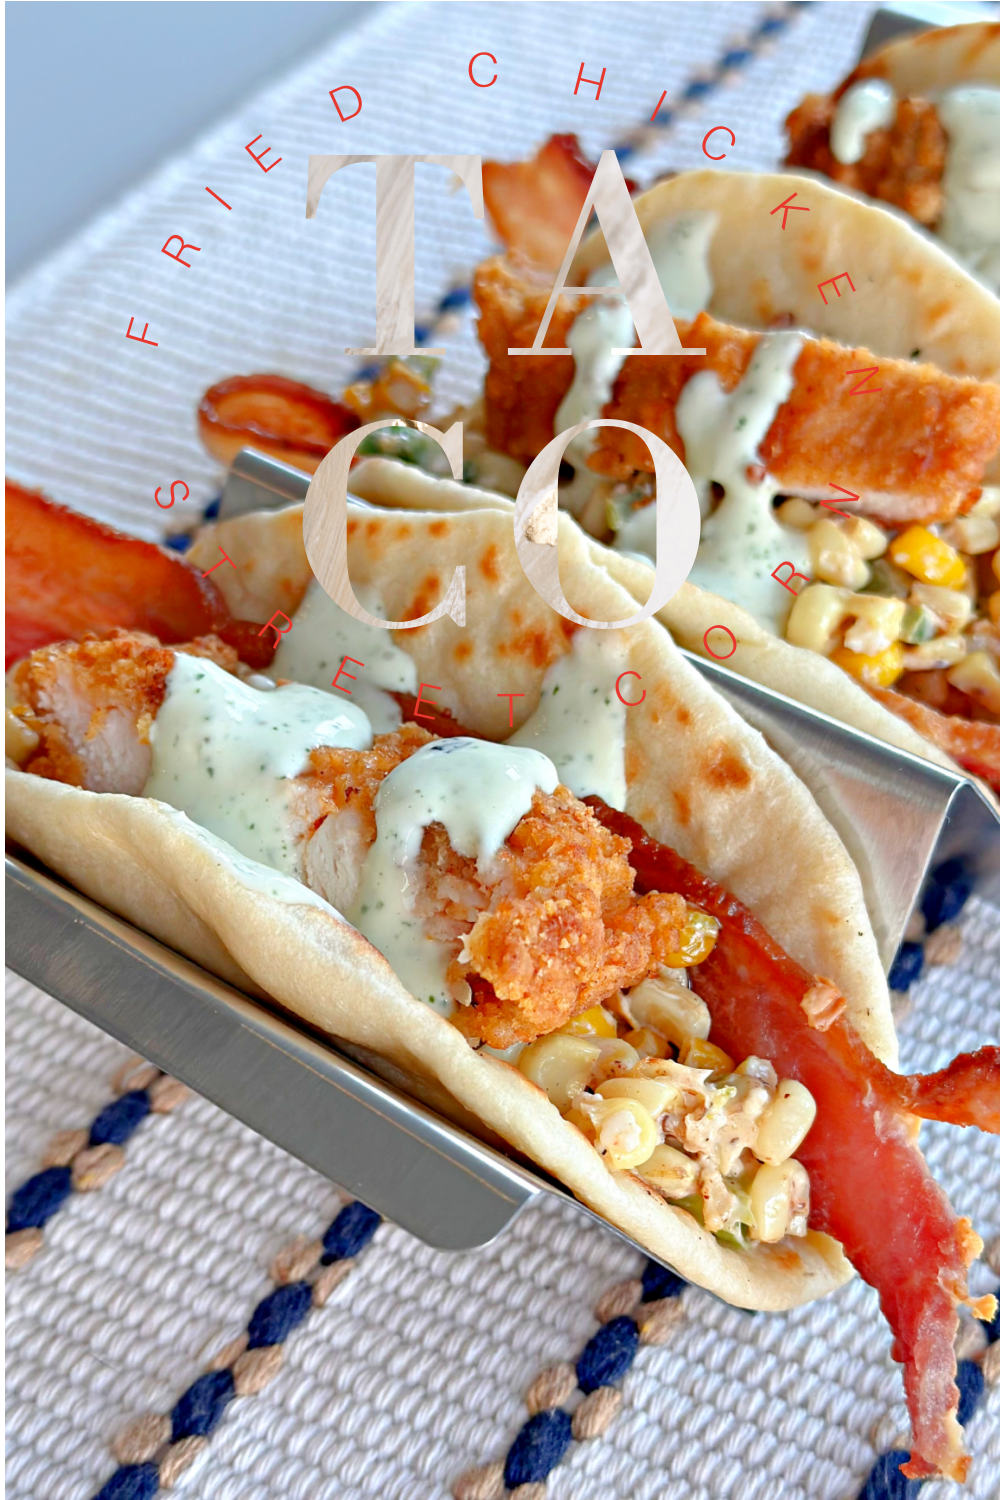 Fried Chicken Tacos #friedchicken #tacos #easyrecipe #dinner #limeranchdressing #bacon #tacotuesday